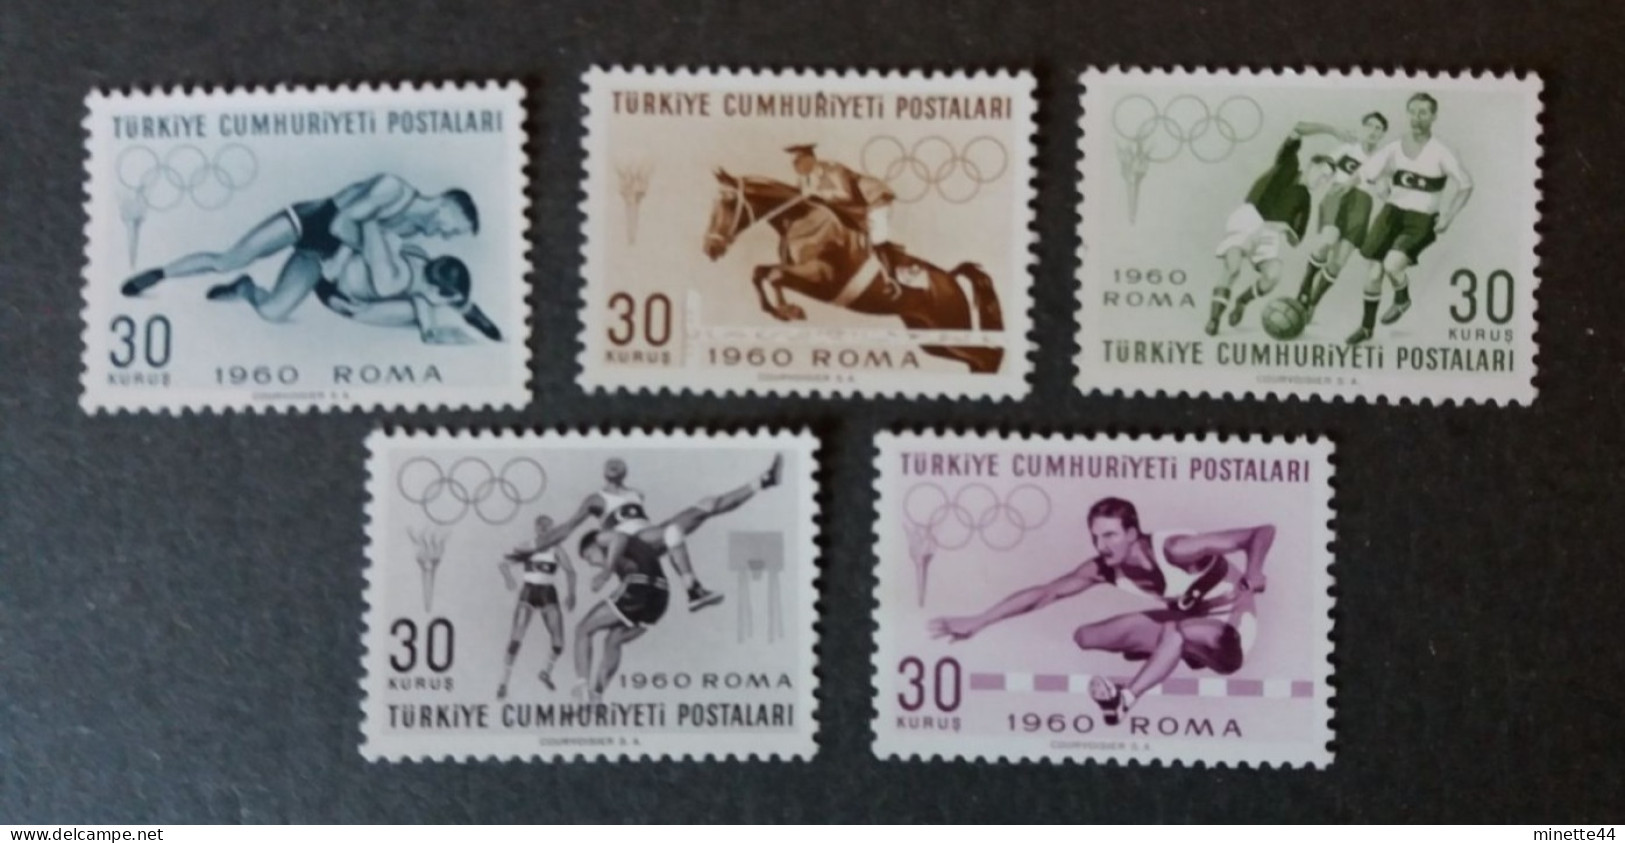 TURQUIE TURKEY 1960 MNH**  GAMES JEUX LUTTE JUMPING ATHLETISME  BASKET FOOTBALL SPORTS - Verano 1960: Roma